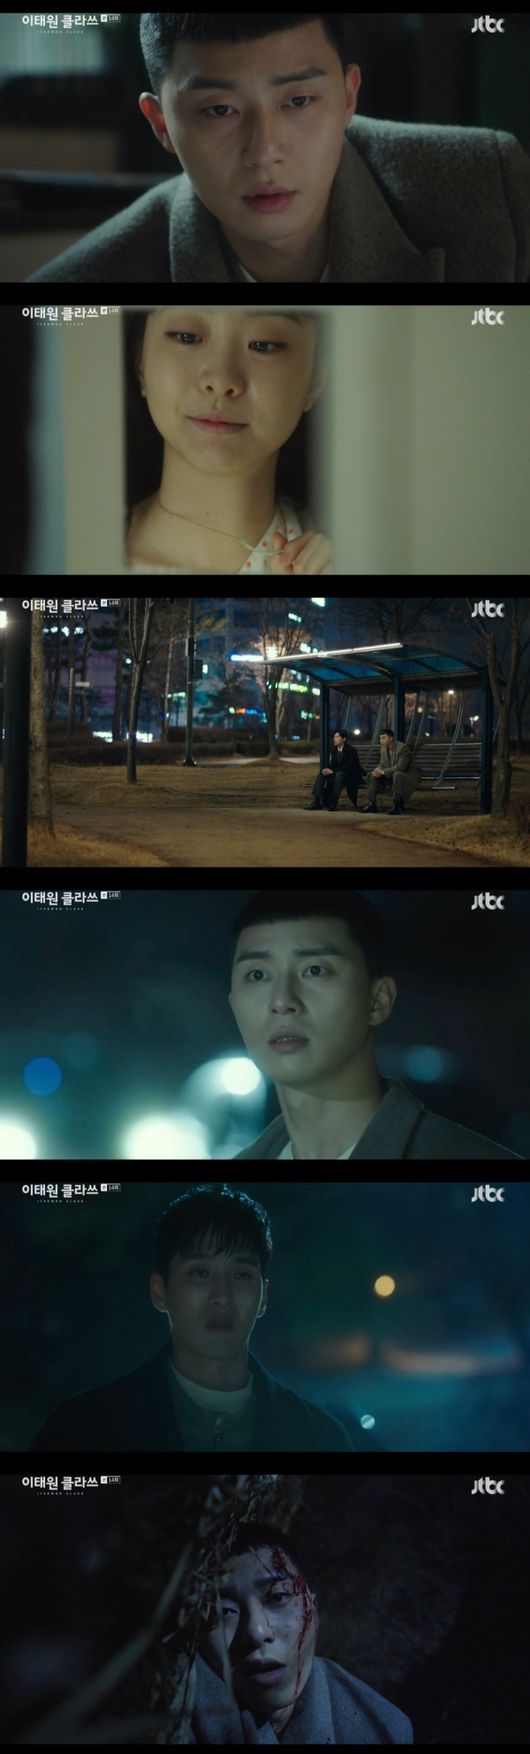 Itaewon Klath Park Seo-joon was convinced of his love for Kim Da-mi; however, immediately, the security prefecture was caught in a trap and was put in Danger to lose his life.In the JTBC gilt drama Itaewon Klath (playplayplay by Gwangjin and directed by Kim Sung-yoon), which was broadcast on the 14th, Park Sae-ro-yi (Park Seo-joon) was shown realizing his love for Joy Seo (Kim Da-mi).Park Sae-ro-yi, Joy Seo, Kang Min-jung (Kim Hye-eun) and Lee Ho-jin (Lee Dae-wit) did not inform Jang Dae-hee (Yoo Jae-myeong) of the pancreatic cancer battle, but planned to remove him from the chairman.So Joy decided to become an outside director of the house.From Chinese contracts to appointments as outside directors, Joysers work was excessive; Park Sae-ro-yi worried about Joyser, so Joyser asked for a date.Park Sae-ro-yi, unlike his heart, rebuffed in cold blood.Park Sae-ro-yis feelings toward Joys book developed day by day; Park Sae-ro-yi reacted sensitively to Joys stone-straight confession, which was no different from usual.Joy, who noticed the change in Park Sae-ro-yi, said, I feel a little bit like a woman.I look like a woman now, he smiled.Oh Soo-ah also realised Park Sae-ro-yis remorse; Park Sae-ro-yi failed to answer Oh Soo-ahs question: Do I still like it?Oh Soo-ah appealed, Its 15 years, you have to make me white, you have to like me, but it was not enough.On the morning of the shareholders meeting, Joy Seo collapsed, and was overworked. Among them, Joy Seos appointment as outside director was rejected.But in Park Sae-ro-yis head, it was just concern for Joyser: Park Sae-ro-yi also bought the necklace that Joyser wanted to have.Park Sae-ro-yi became convinced of his mind toward Joy Seo as he listened to Choi Seung-kwon (Ryu Kyung-soo)s store event plan.Park Sae-ro-yi felt complex feelings - sorry, gratitude and love - to Joyser, and thought: Its all you.Park Sae-ro-yi headed straight to the hospital, where Park Sae-ro-yi told Jang Geun-soo, who was confronted by the hospital, I should fold even if my brothers favorite girls heart comes up.Its betrayal, its trash. But to do it, I... betrayal, trash. You can swear, and youll hit. I like Seo-young Lee.At the same time, Joy was kidnapped by a man bought by The Fountainhead; Park Sae-ro-yi, who learned this, ran straight to save Joy.Jang Geun-soo followed, feeling an unusual sign.Jang rushed at the Fountainhead, when the car rushed at him, following the direction of the Fountainhead.Park Sae-ro-yi saved Jang Geun-soo, who was about to be hit, and was instead hit by a traffic accident; Park Sae-ro-yi lost his mind, bleeding.Memories with Joyser crossed like a juma lamp: Park Sae-ro-yi recalled the past that pushed Joyser away for four years, thinking:  (Joyser) I want to see him crazy.Itaewon Klath captures broadcast screen